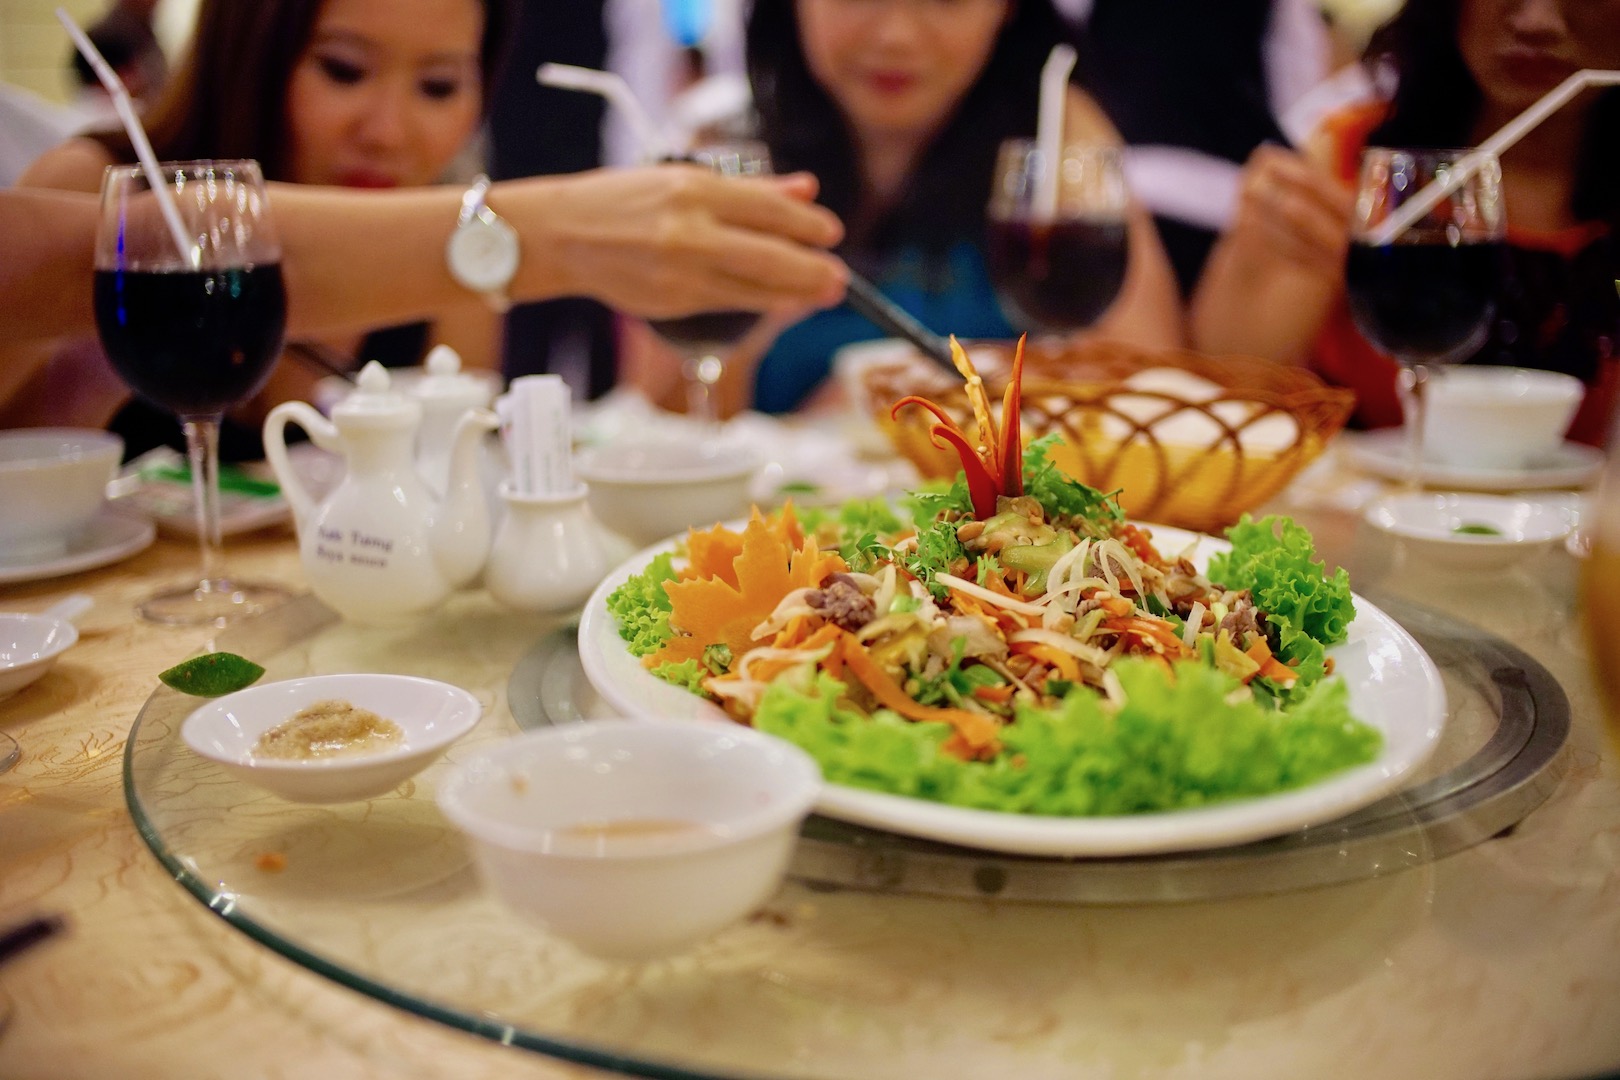 Wedding party members enjoy the appetizer at a wedding party in Ho Chi Minh City on April 20, 2014. Photo: Tien Bui